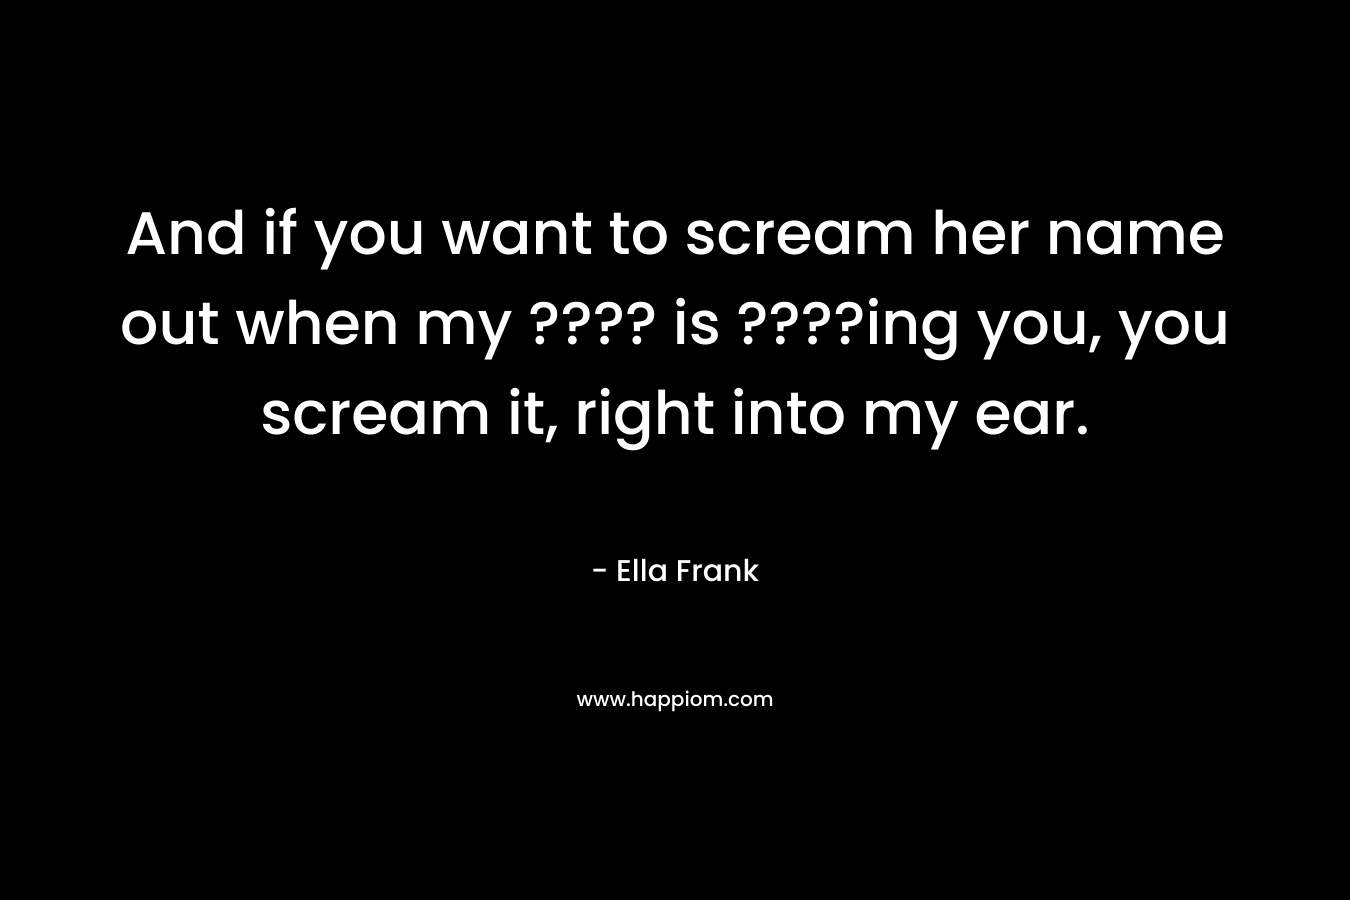 And if you want to scream her name out when my ???? is ????ing you, you scream it, right into my ear. – Ella Frank